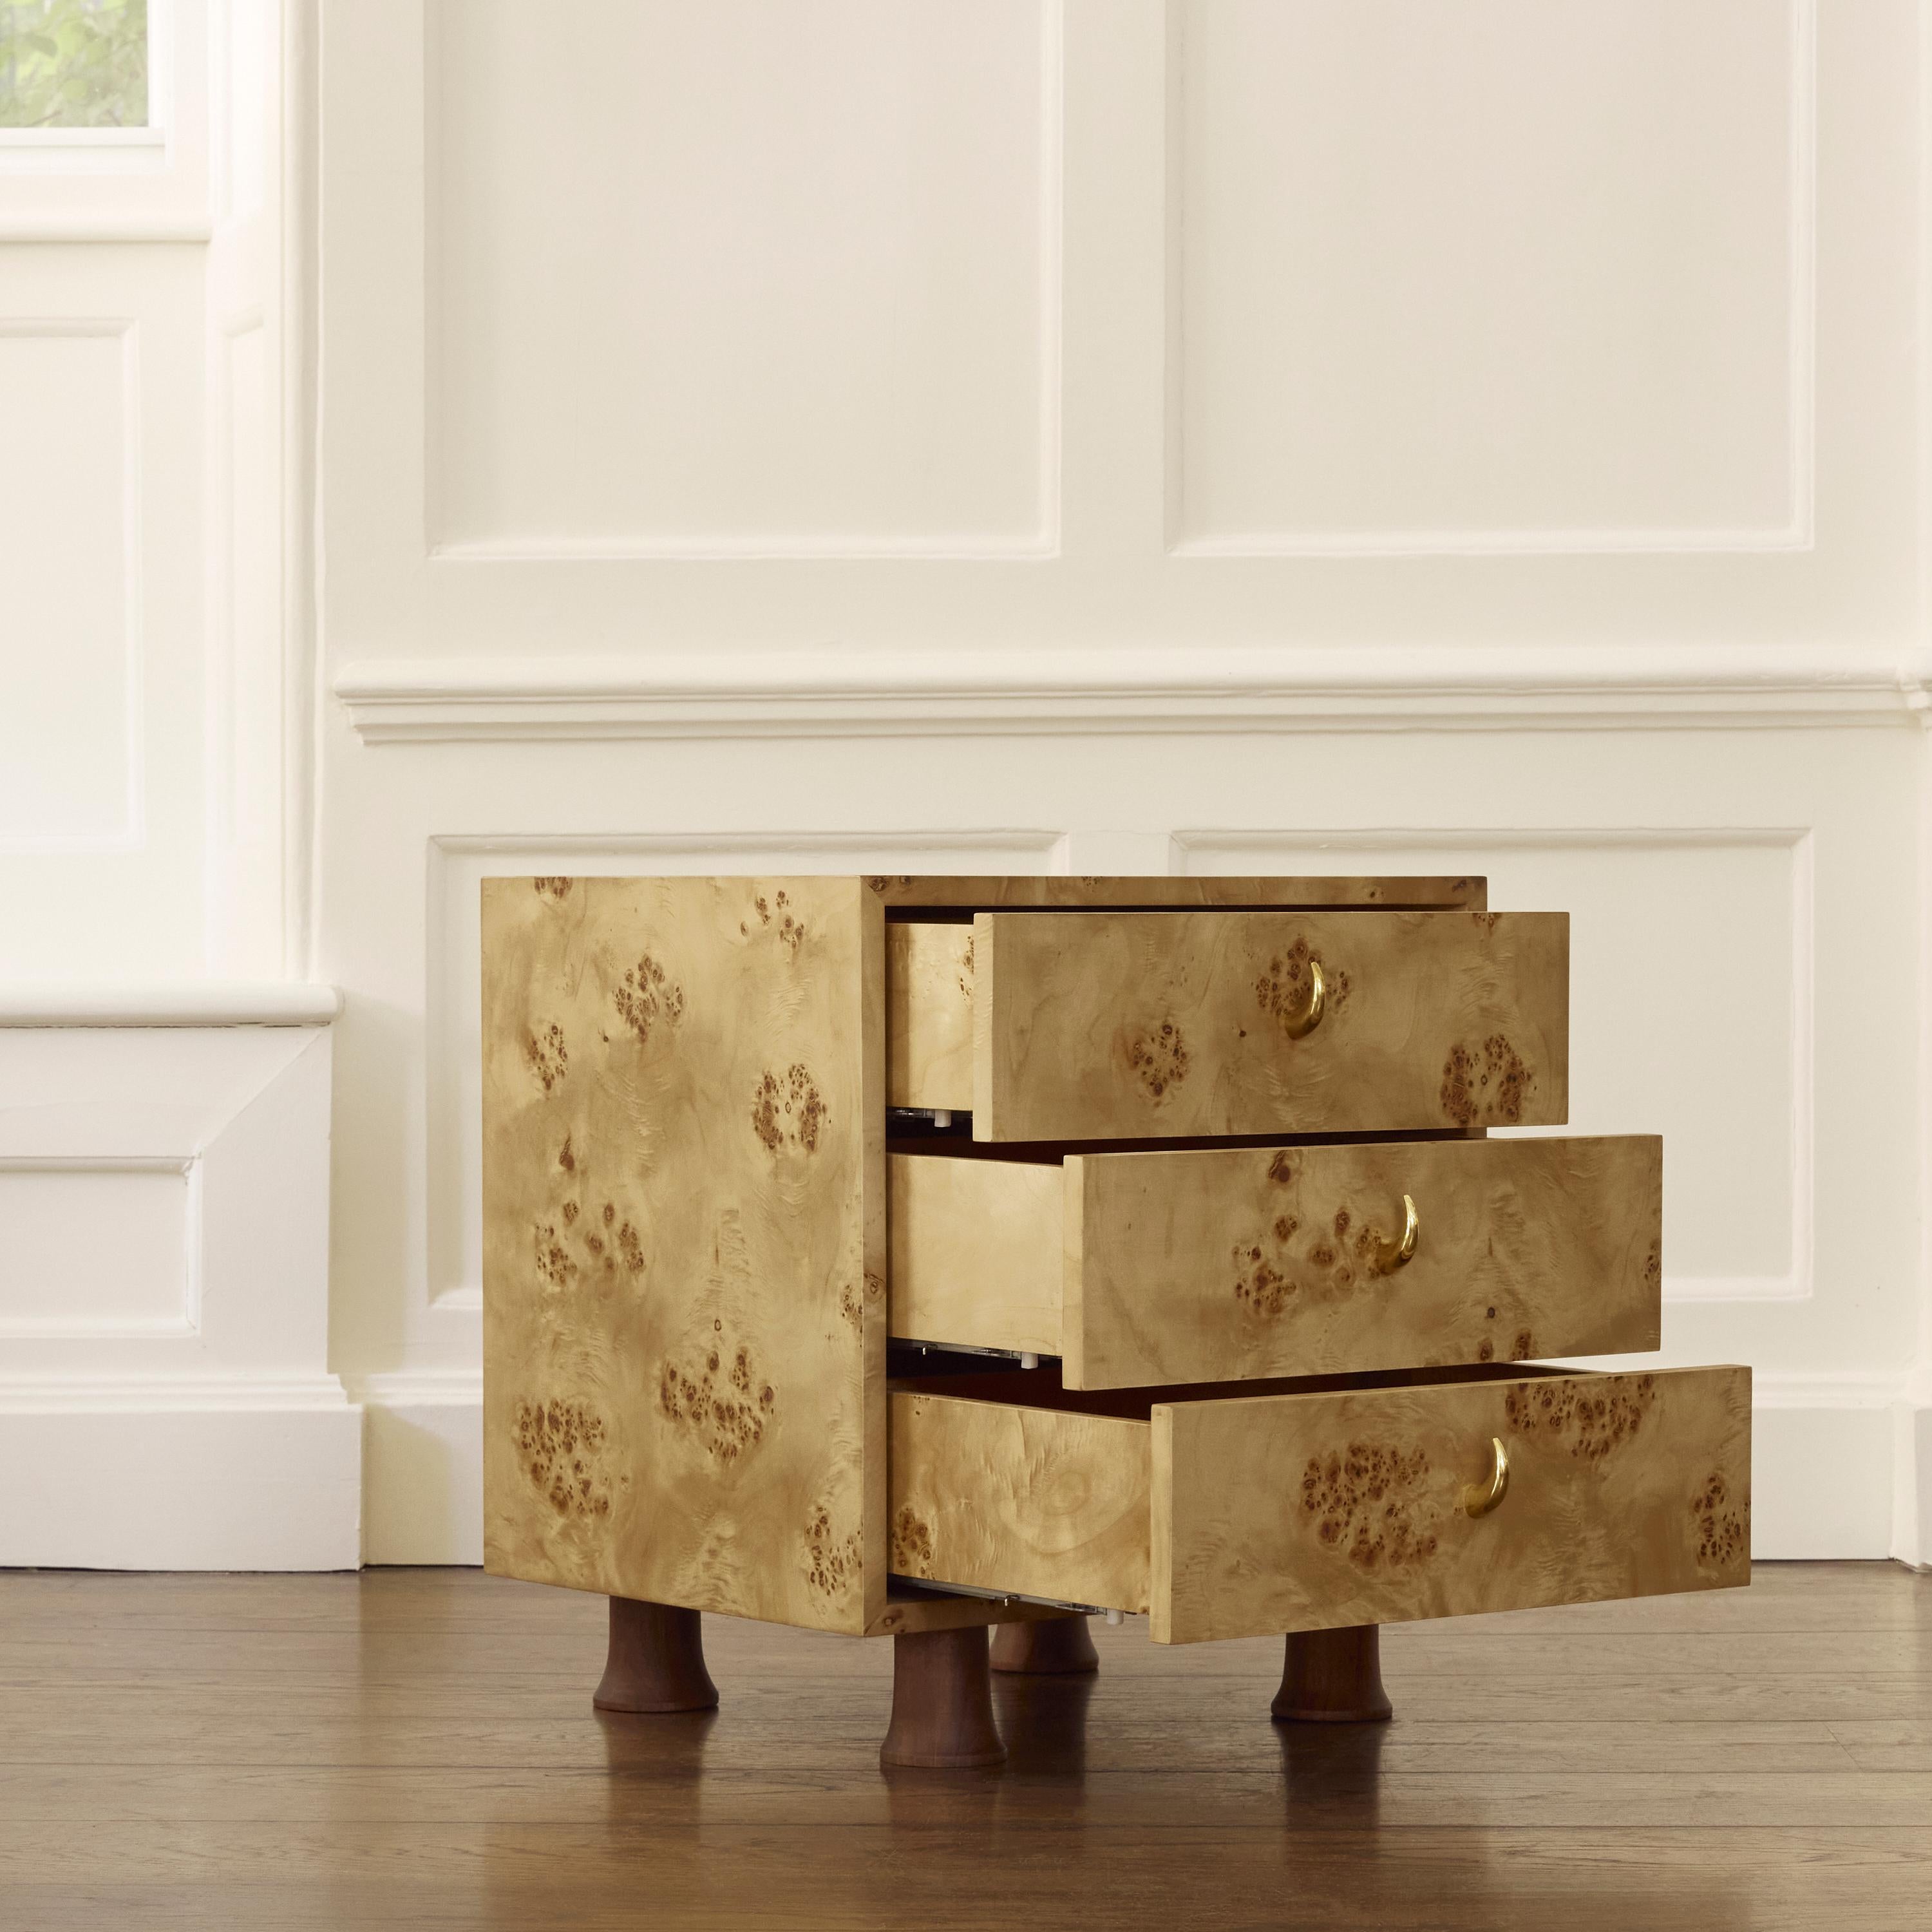 The Sable Bedside Table’s body is cut and constructed out of mappa burl, a wood veneer whose grains are peppered in natural contrasts of amber and hazel. The piece is finished with polished brass horn handles and propped by American black walnut